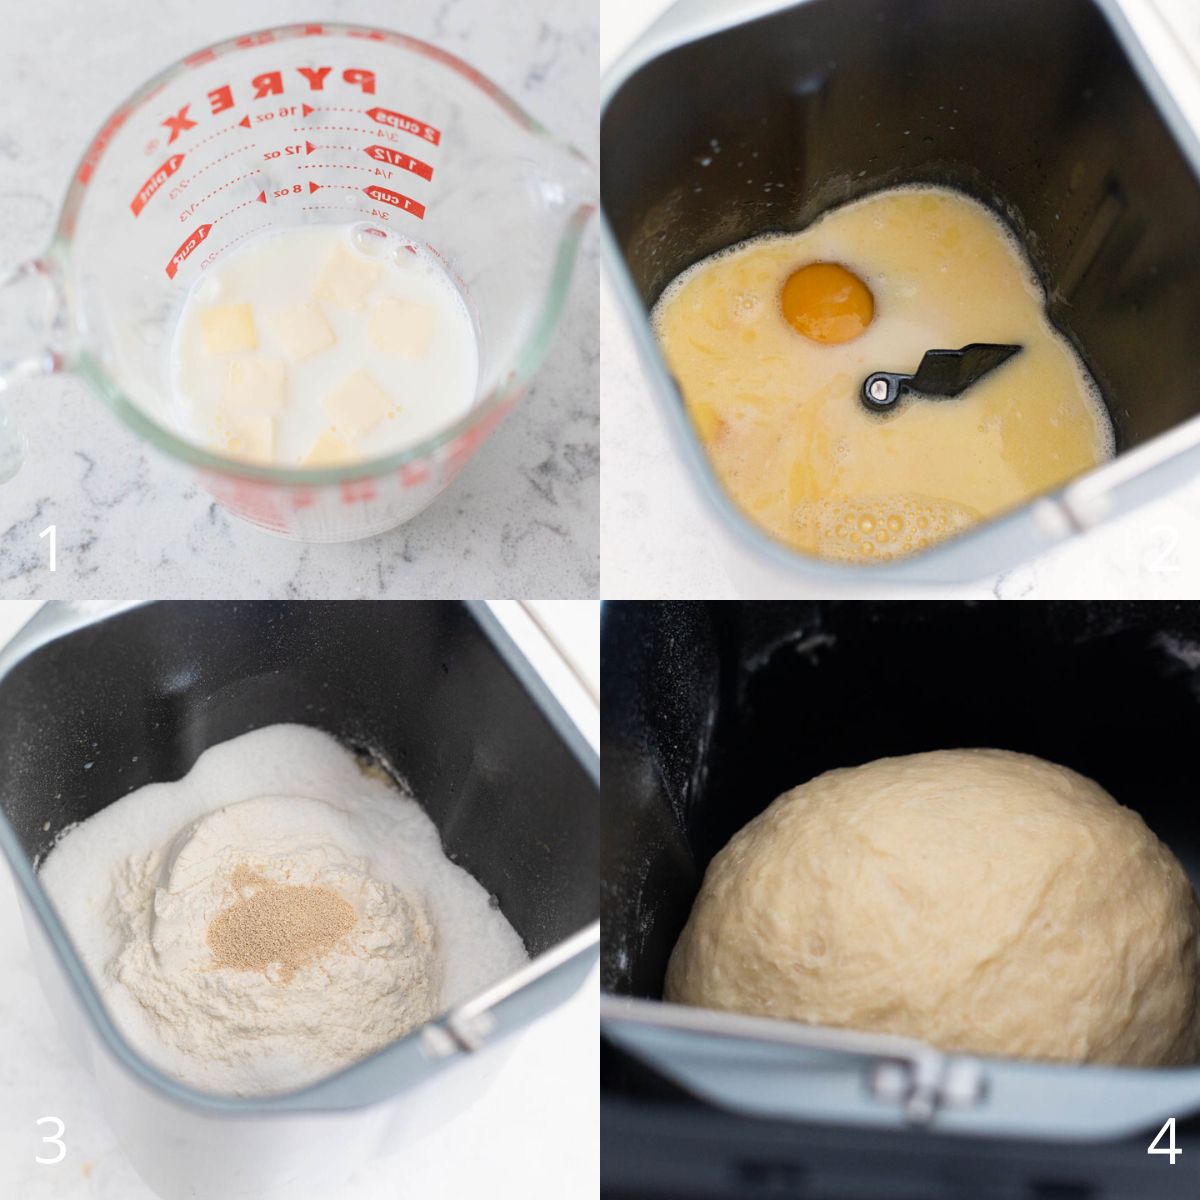 The step by step photos show how to prep the brioche dough in the bread machine pan.